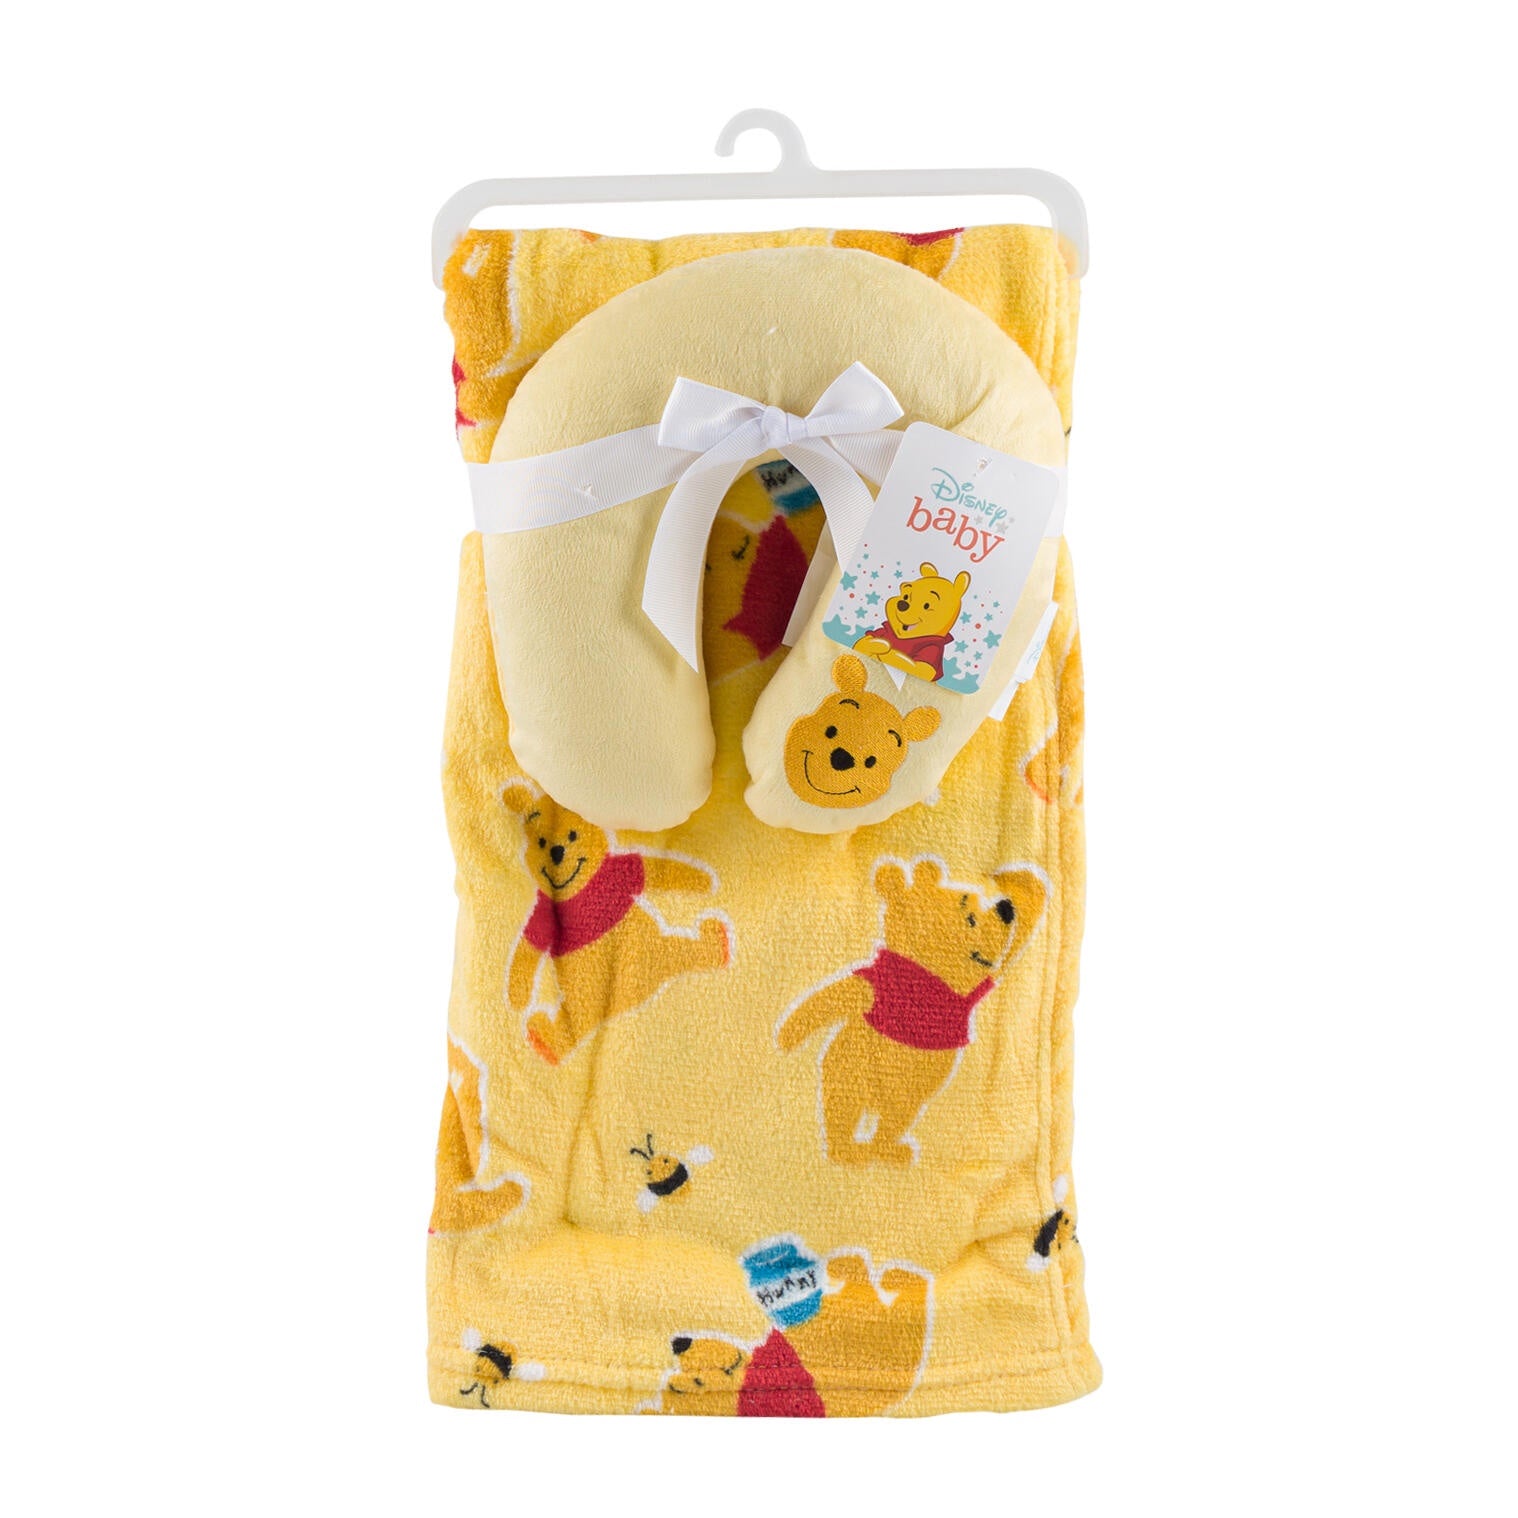 Disney Baby Winnie the Pooh Blanket and Headrest Set- Great Headrest Pillow for Travel